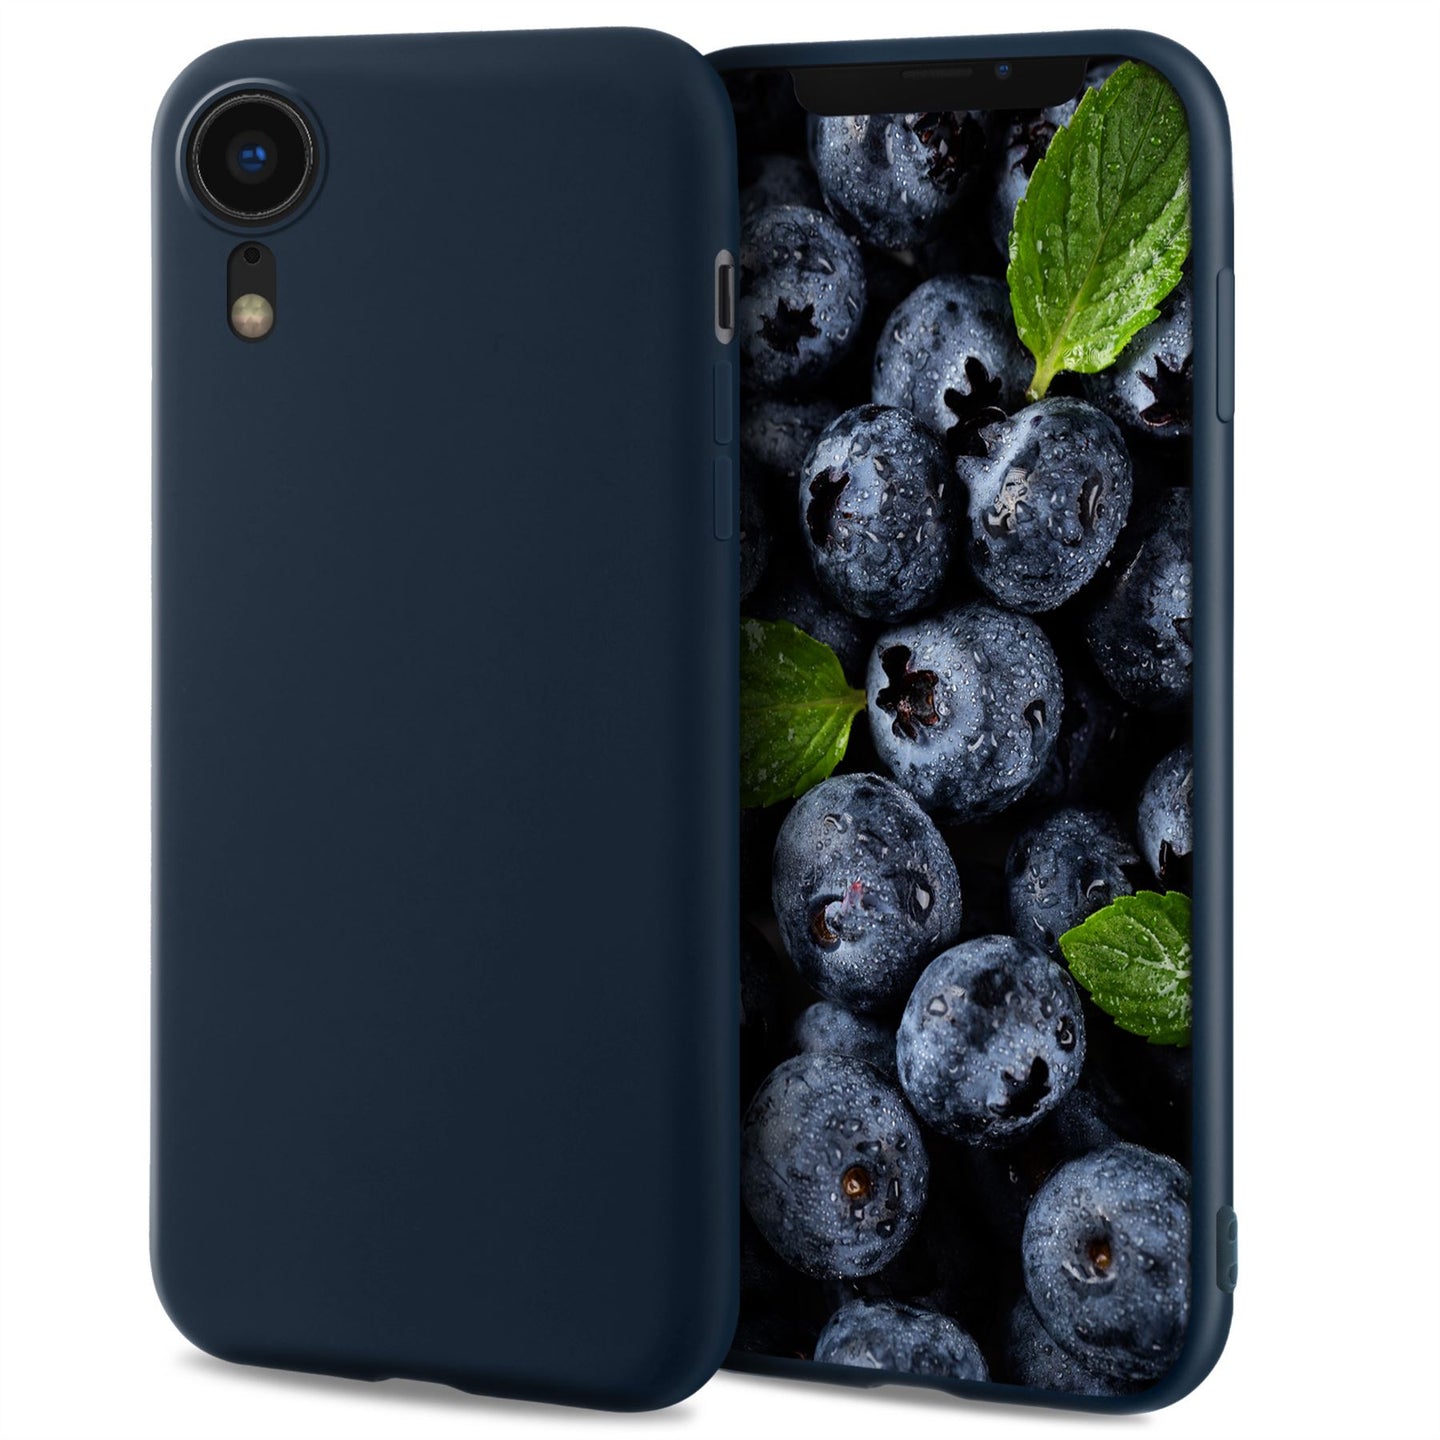 Moozy Lifestyle. Designed for iPhone XR Case, Midnight Blue - Liquid Silicone Cover with Matte Finish and Soft Microfiber Lining